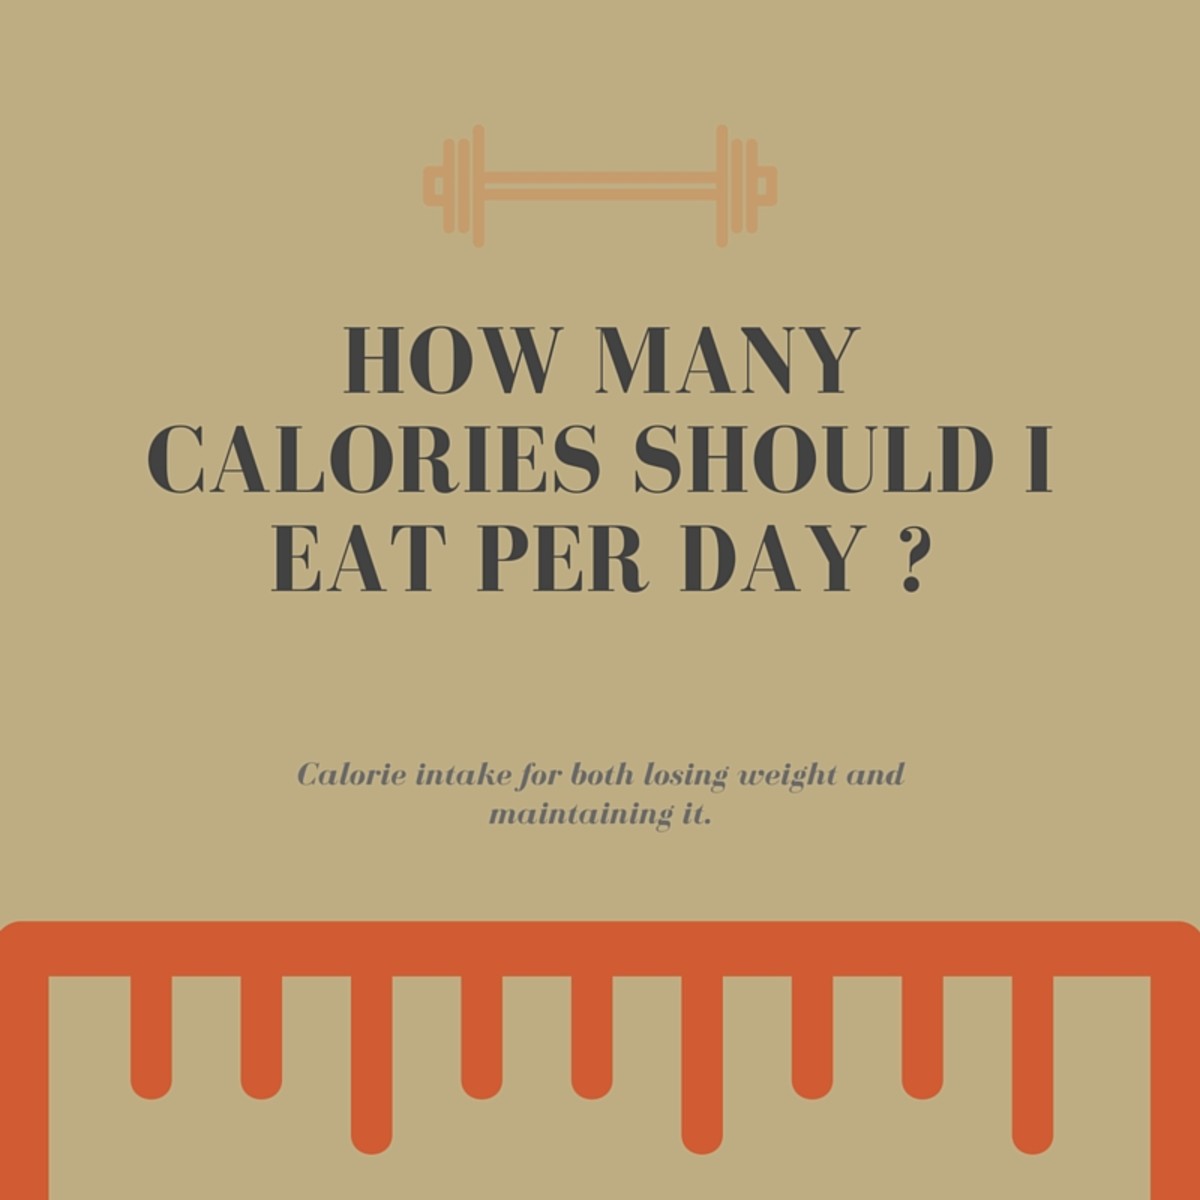 how many calories to lose weight in a day